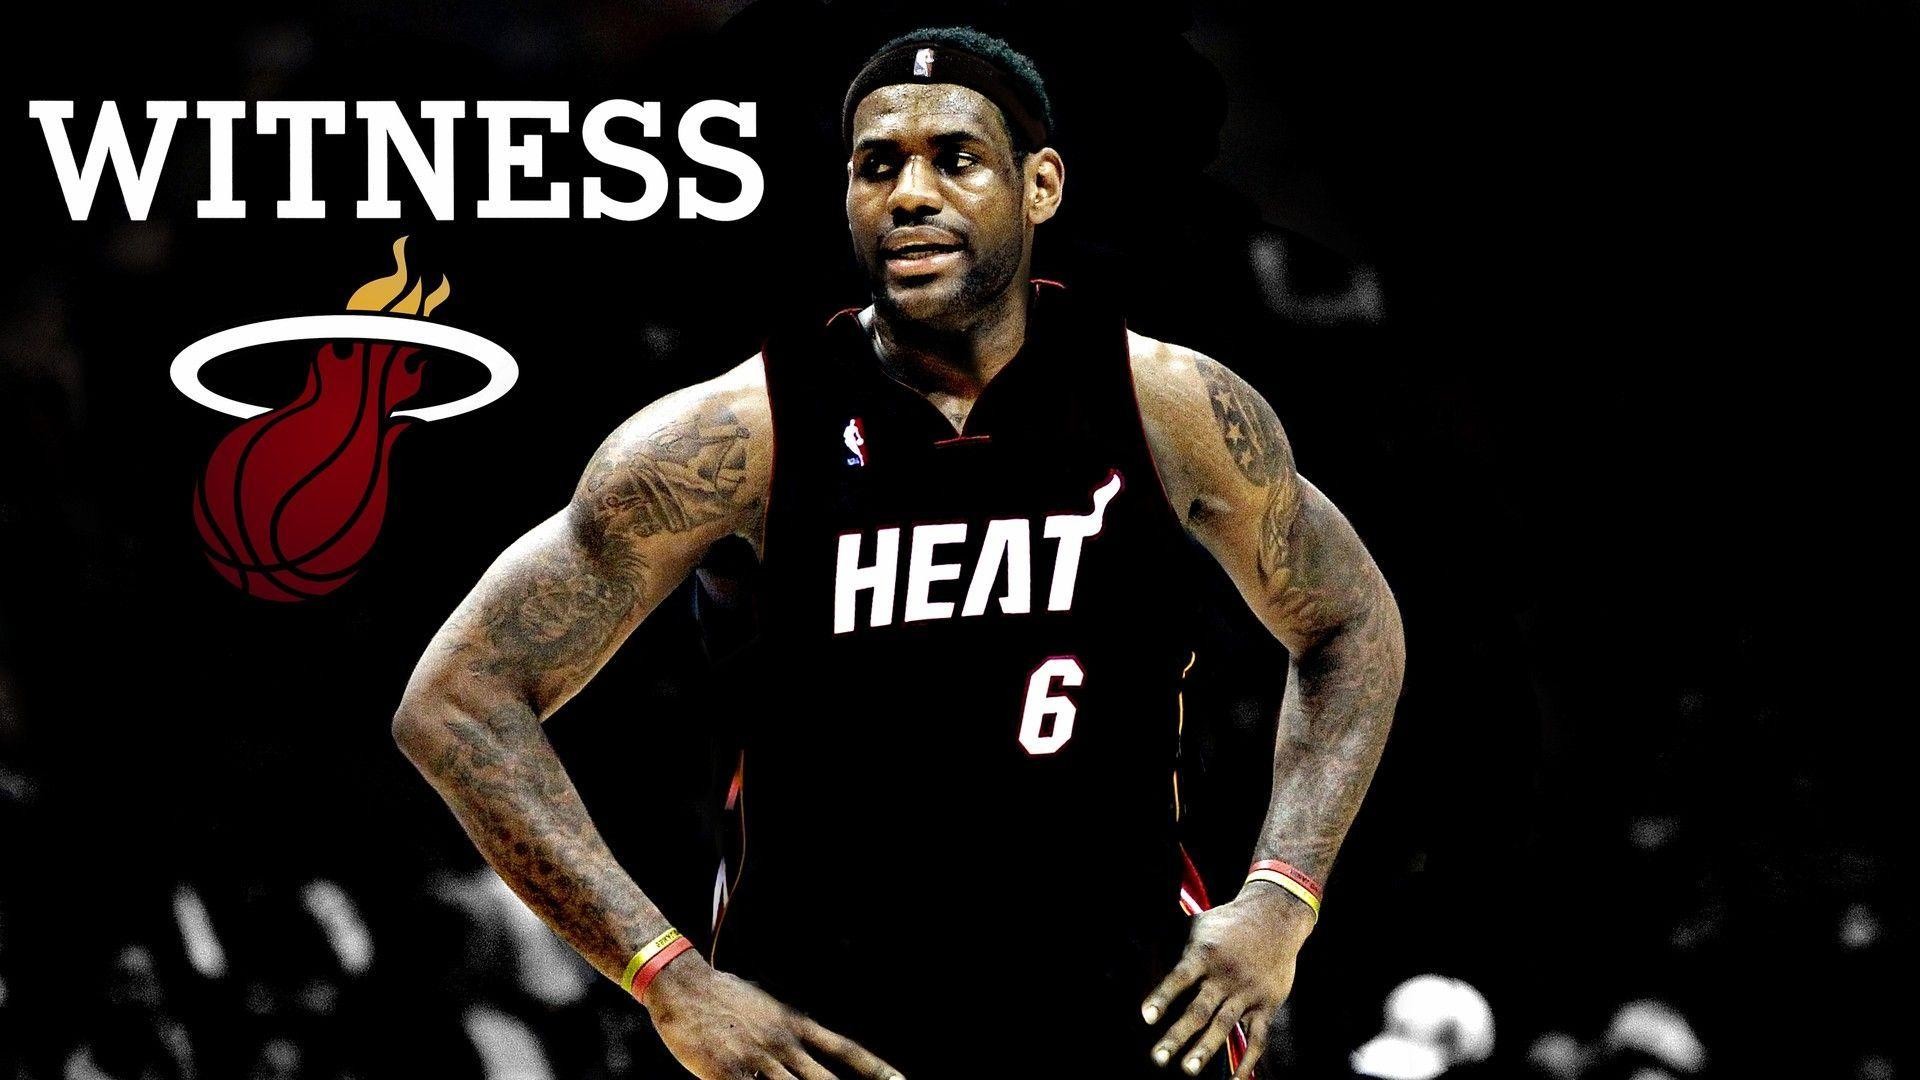 1920x1080 LeBron James Wallpapers 2015 HD - Page 8 of 17 Sporteology